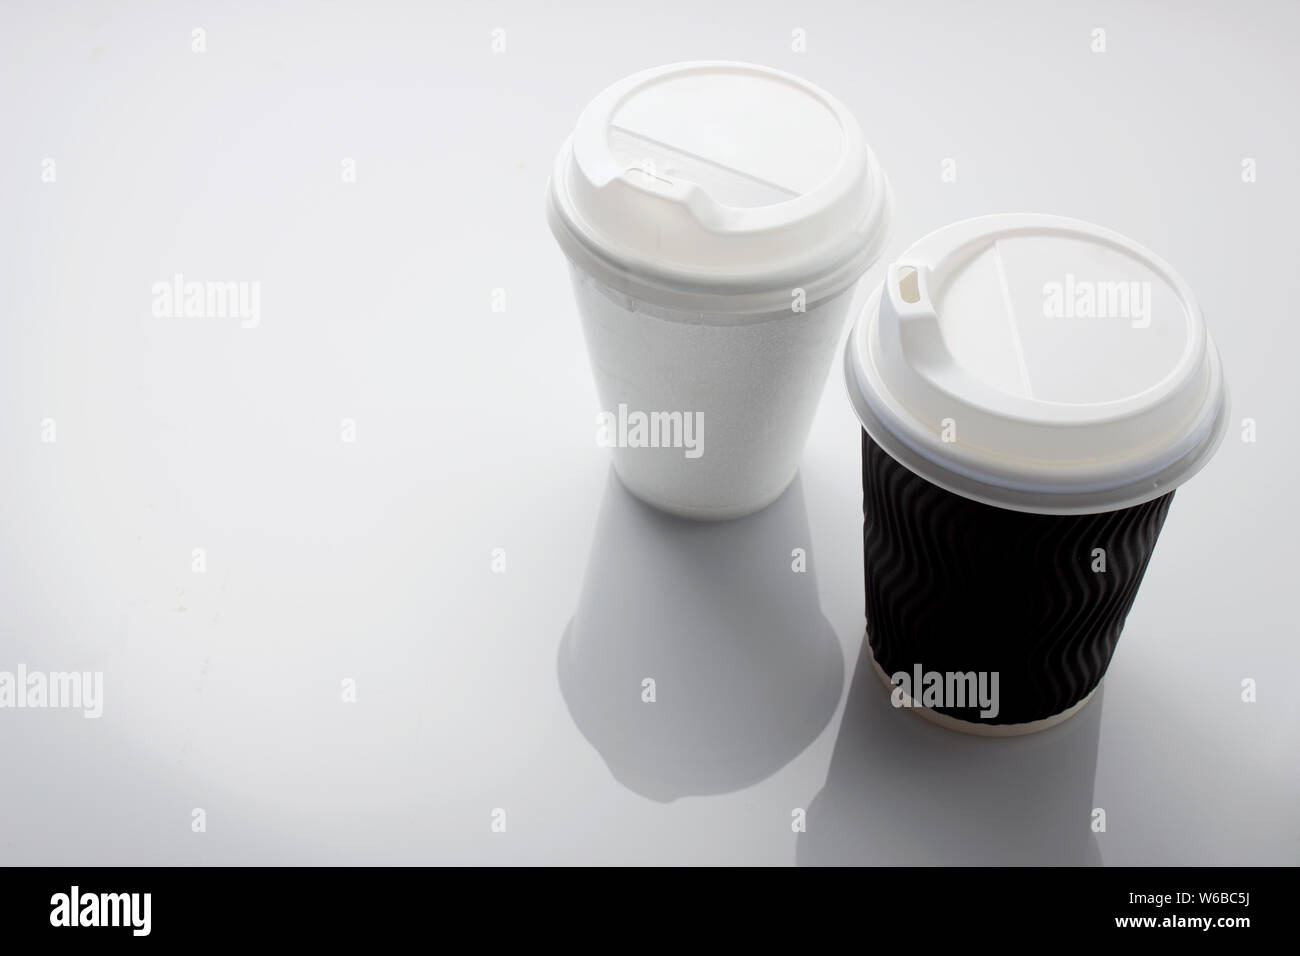 Disposal Coffee Cups on White Background Stock Photo